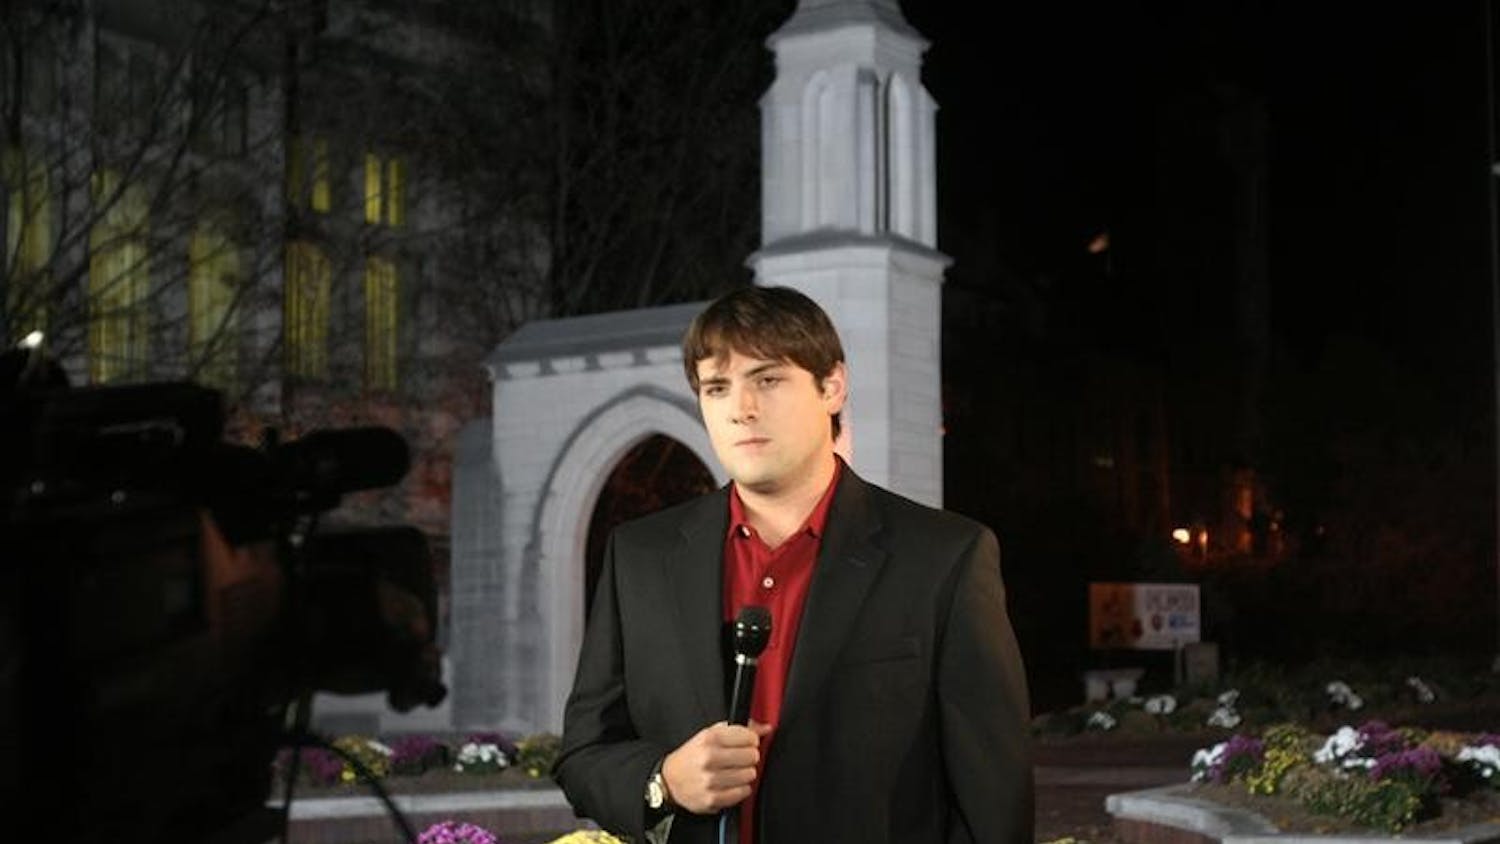 Luke Russert, NBC correspondent, prepares to do a live stand up for the "NBC Nightly News with Brian Williams" on Monday night in front of the Sample Gates. Russert will be on campus today filming live segments for NBC's "Today Show" and other election coverage.